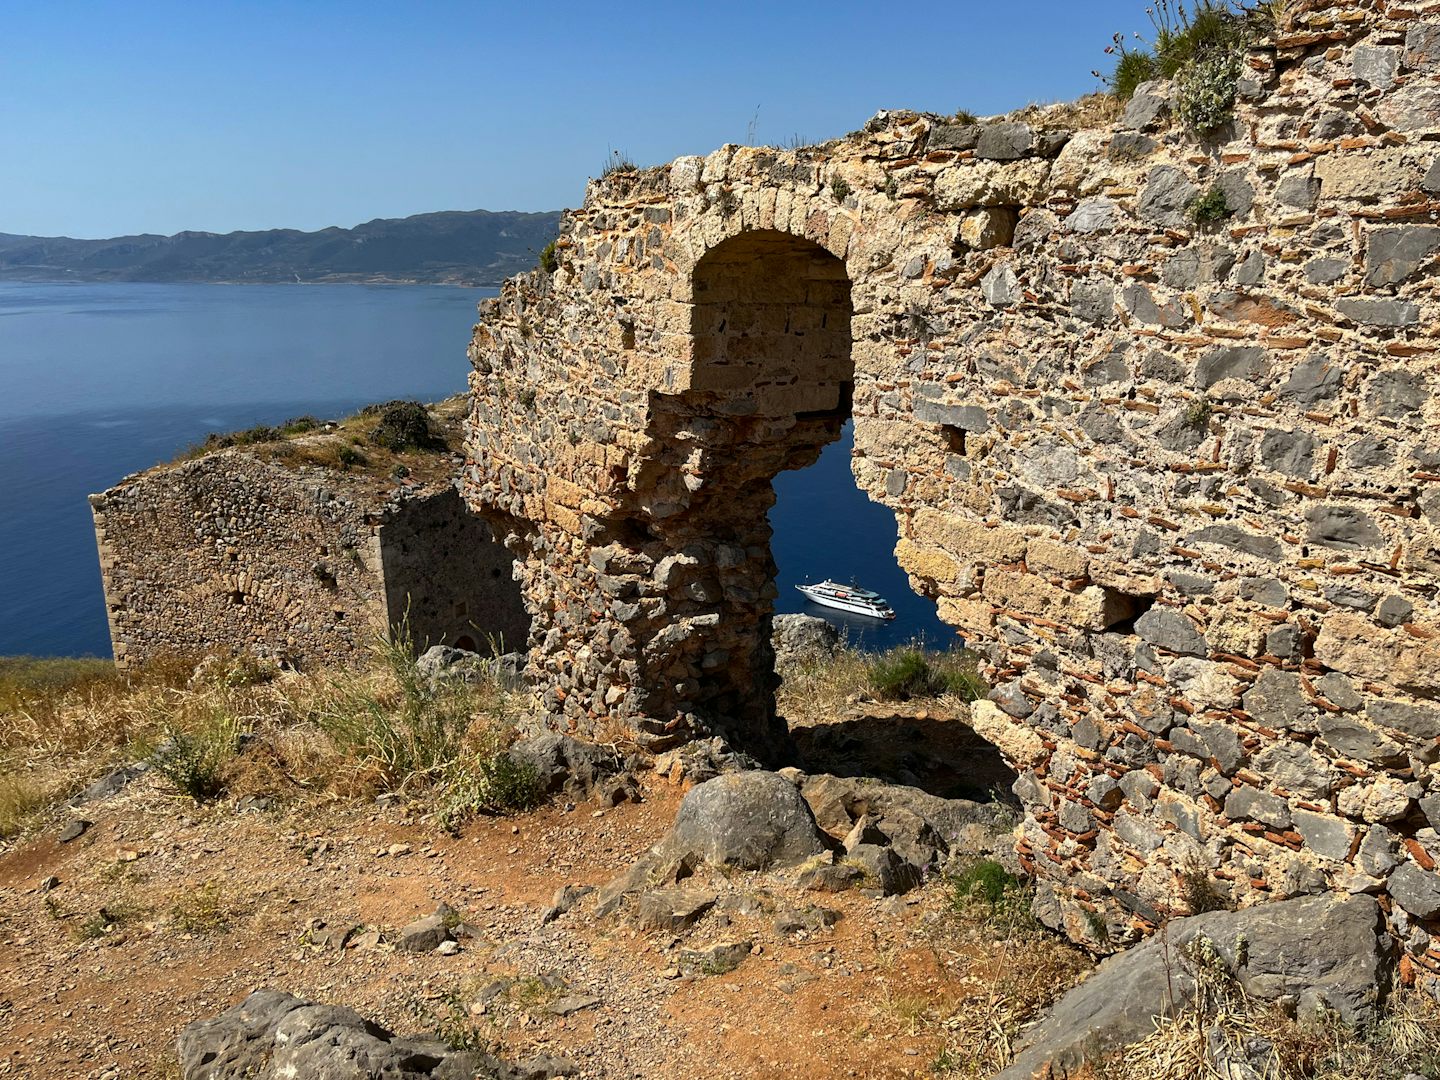 The Variety Voyager peeks through an archway on the top of Monemvasia